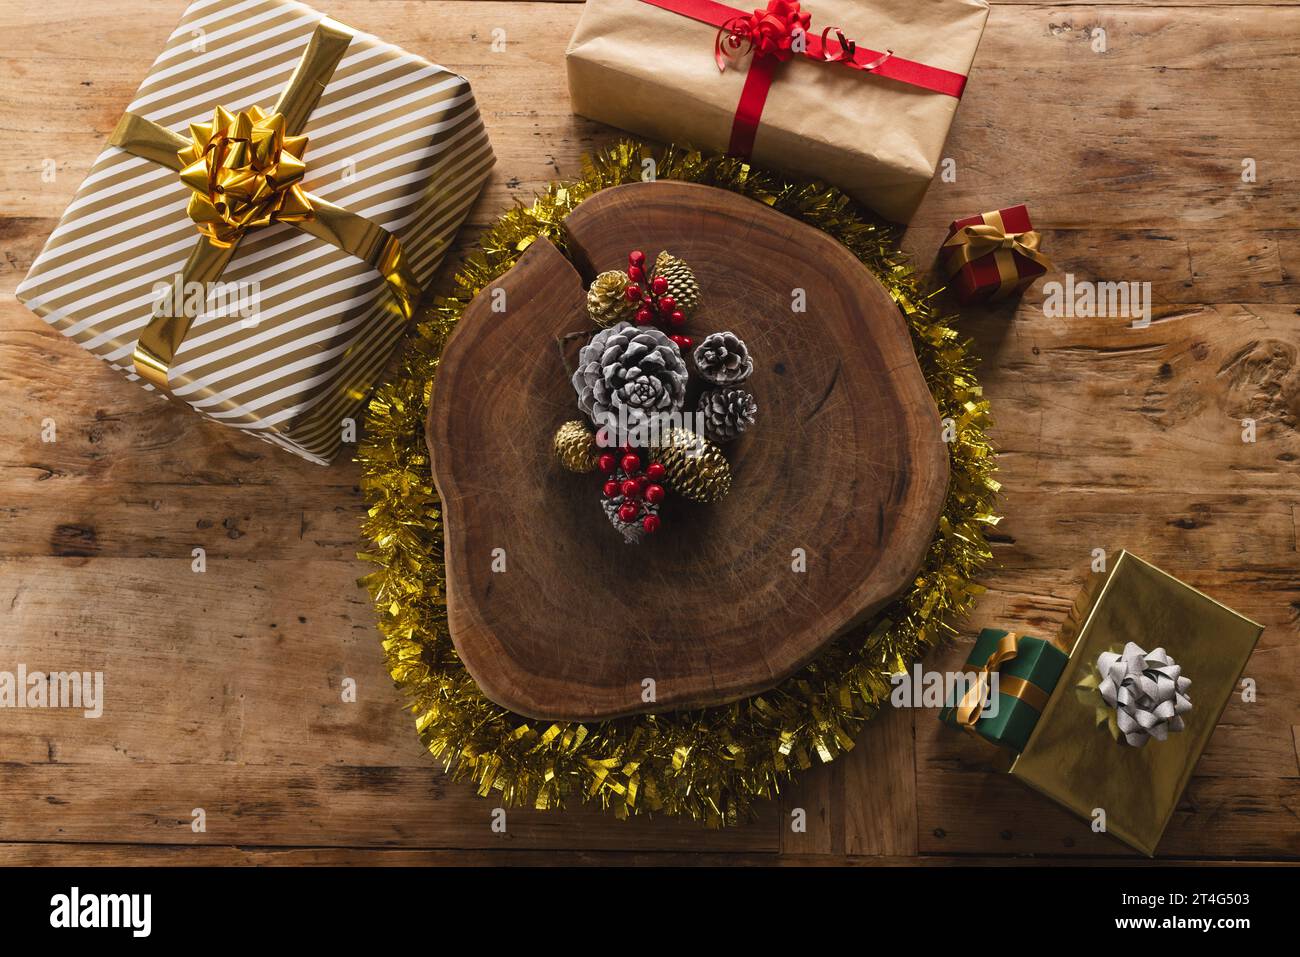 Beautiful christmas decorations and gifts on wooden countertop Stock Photo